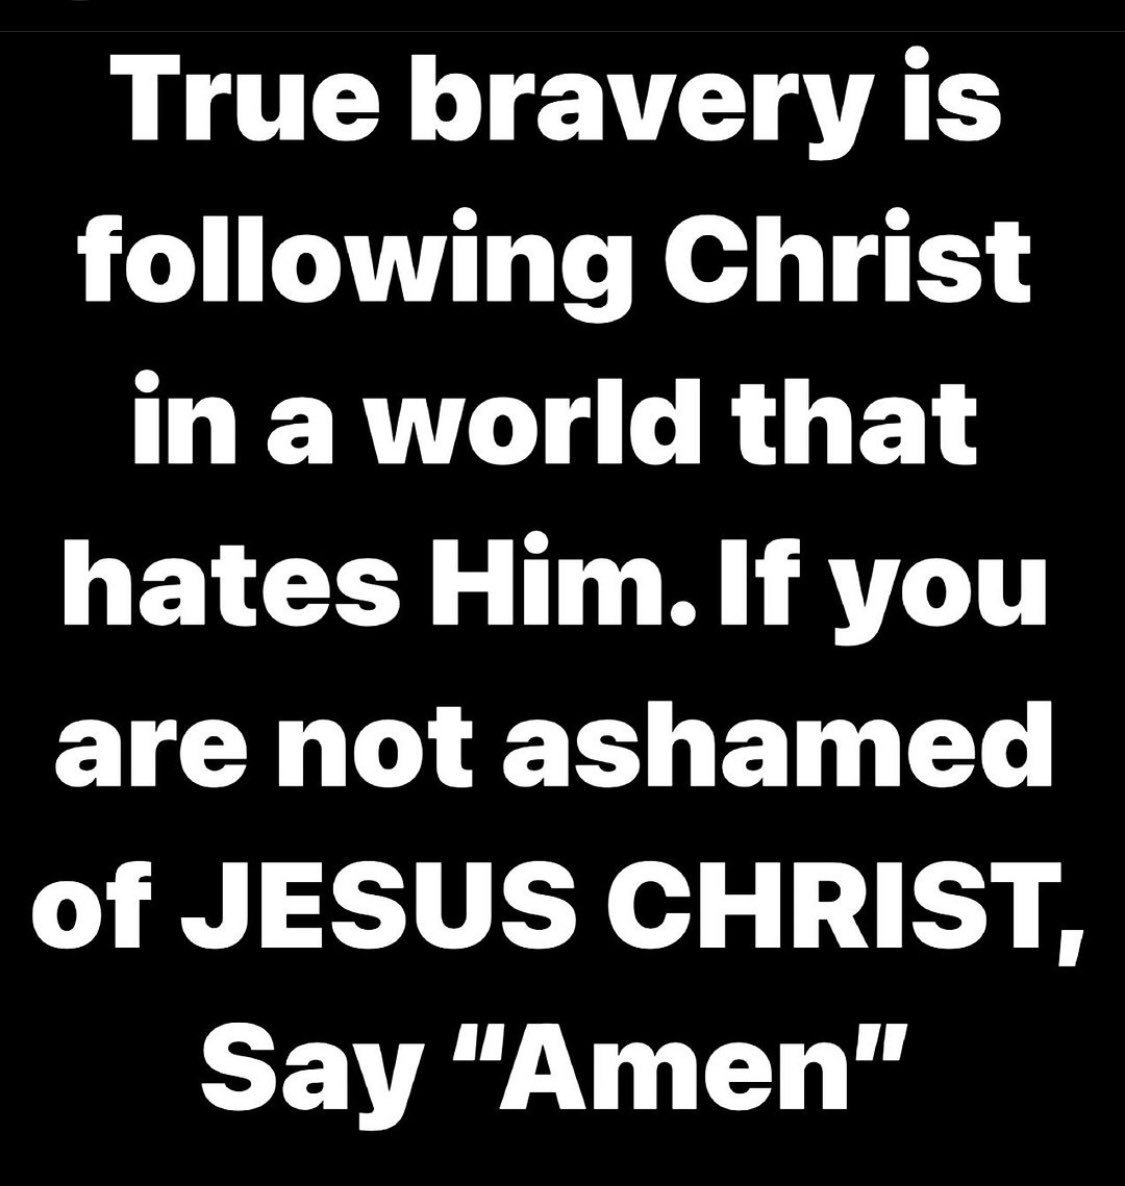 ”For I am not ashamed of the gospel of Christ: for it is the power of God unto salvation to every one that believeth; to the Jew first, and also to the Greek.“ Romans 1:16 KJV